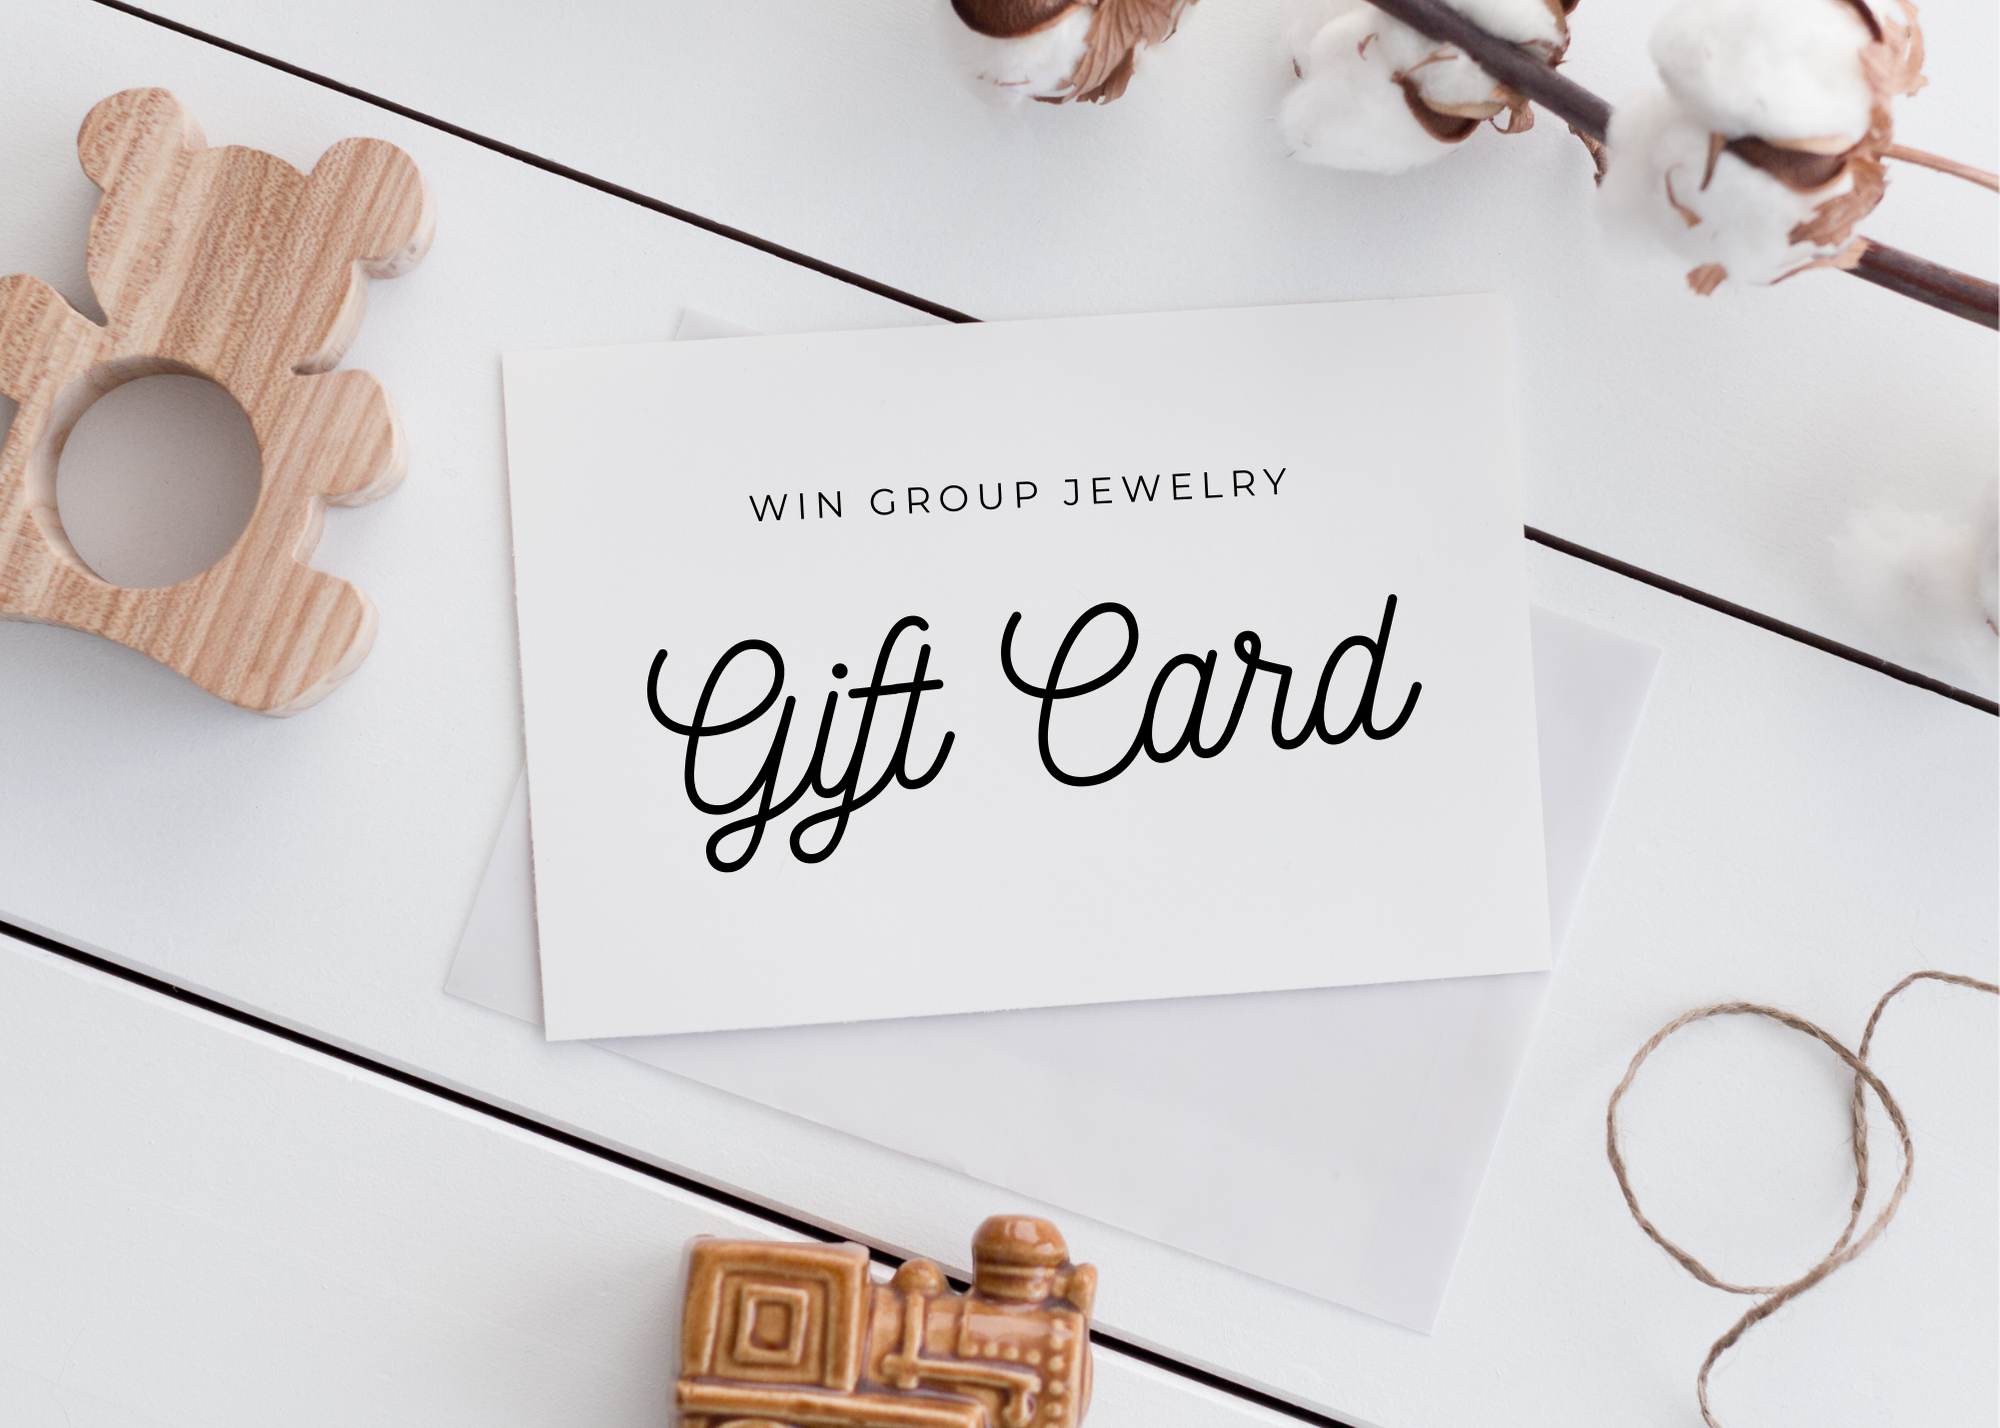 Gift Card - wingroupjewelry